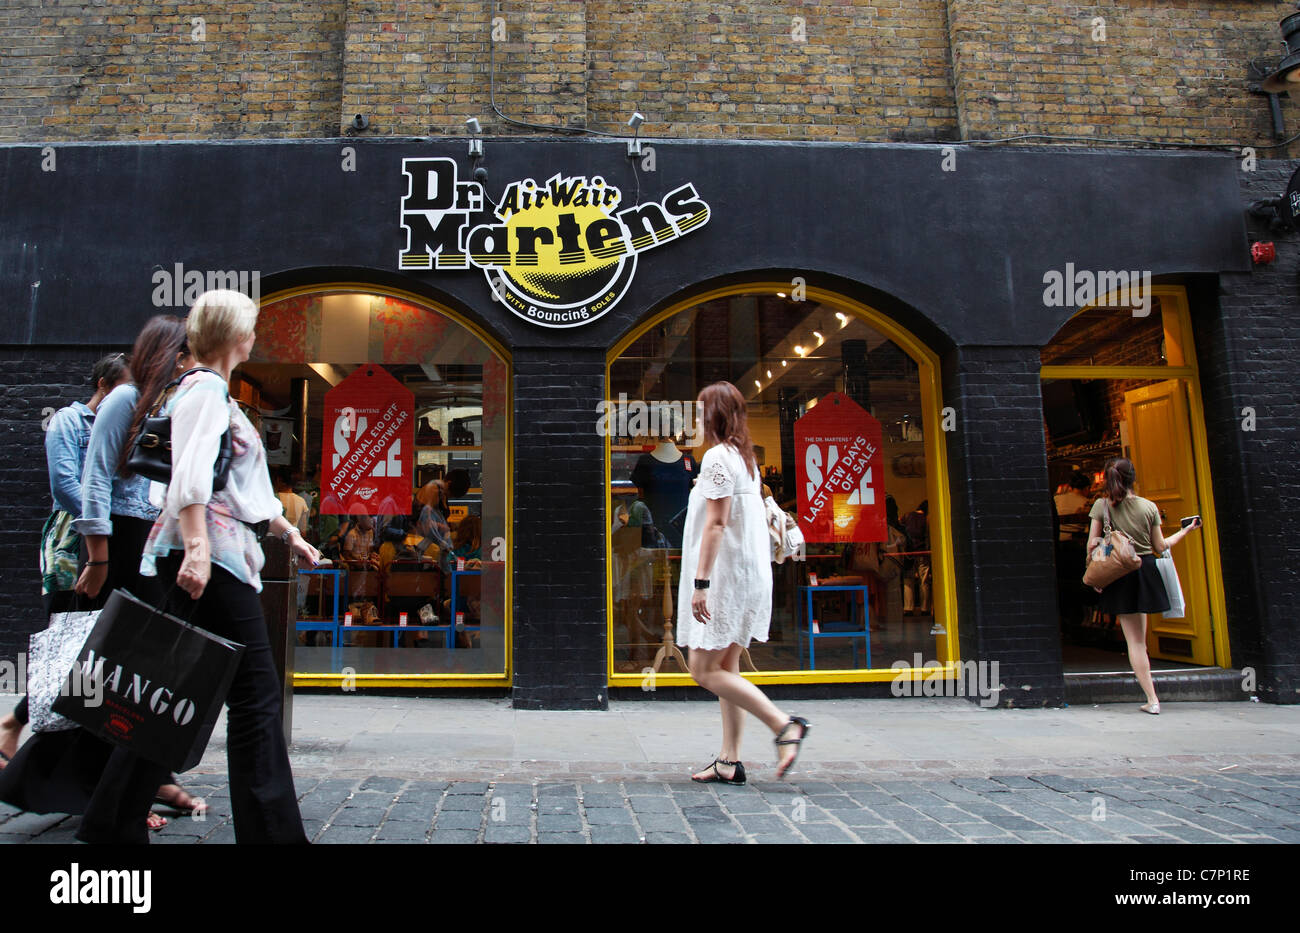 Dr Martens Shoe Shop In Covent Garden, London Still Closed Due To Corona  Virus Covid Emergency In The United Kingdom In 2020 Editorial Photography  Image Of Ensuring, Iconic: 187667582 | ngroup.tn